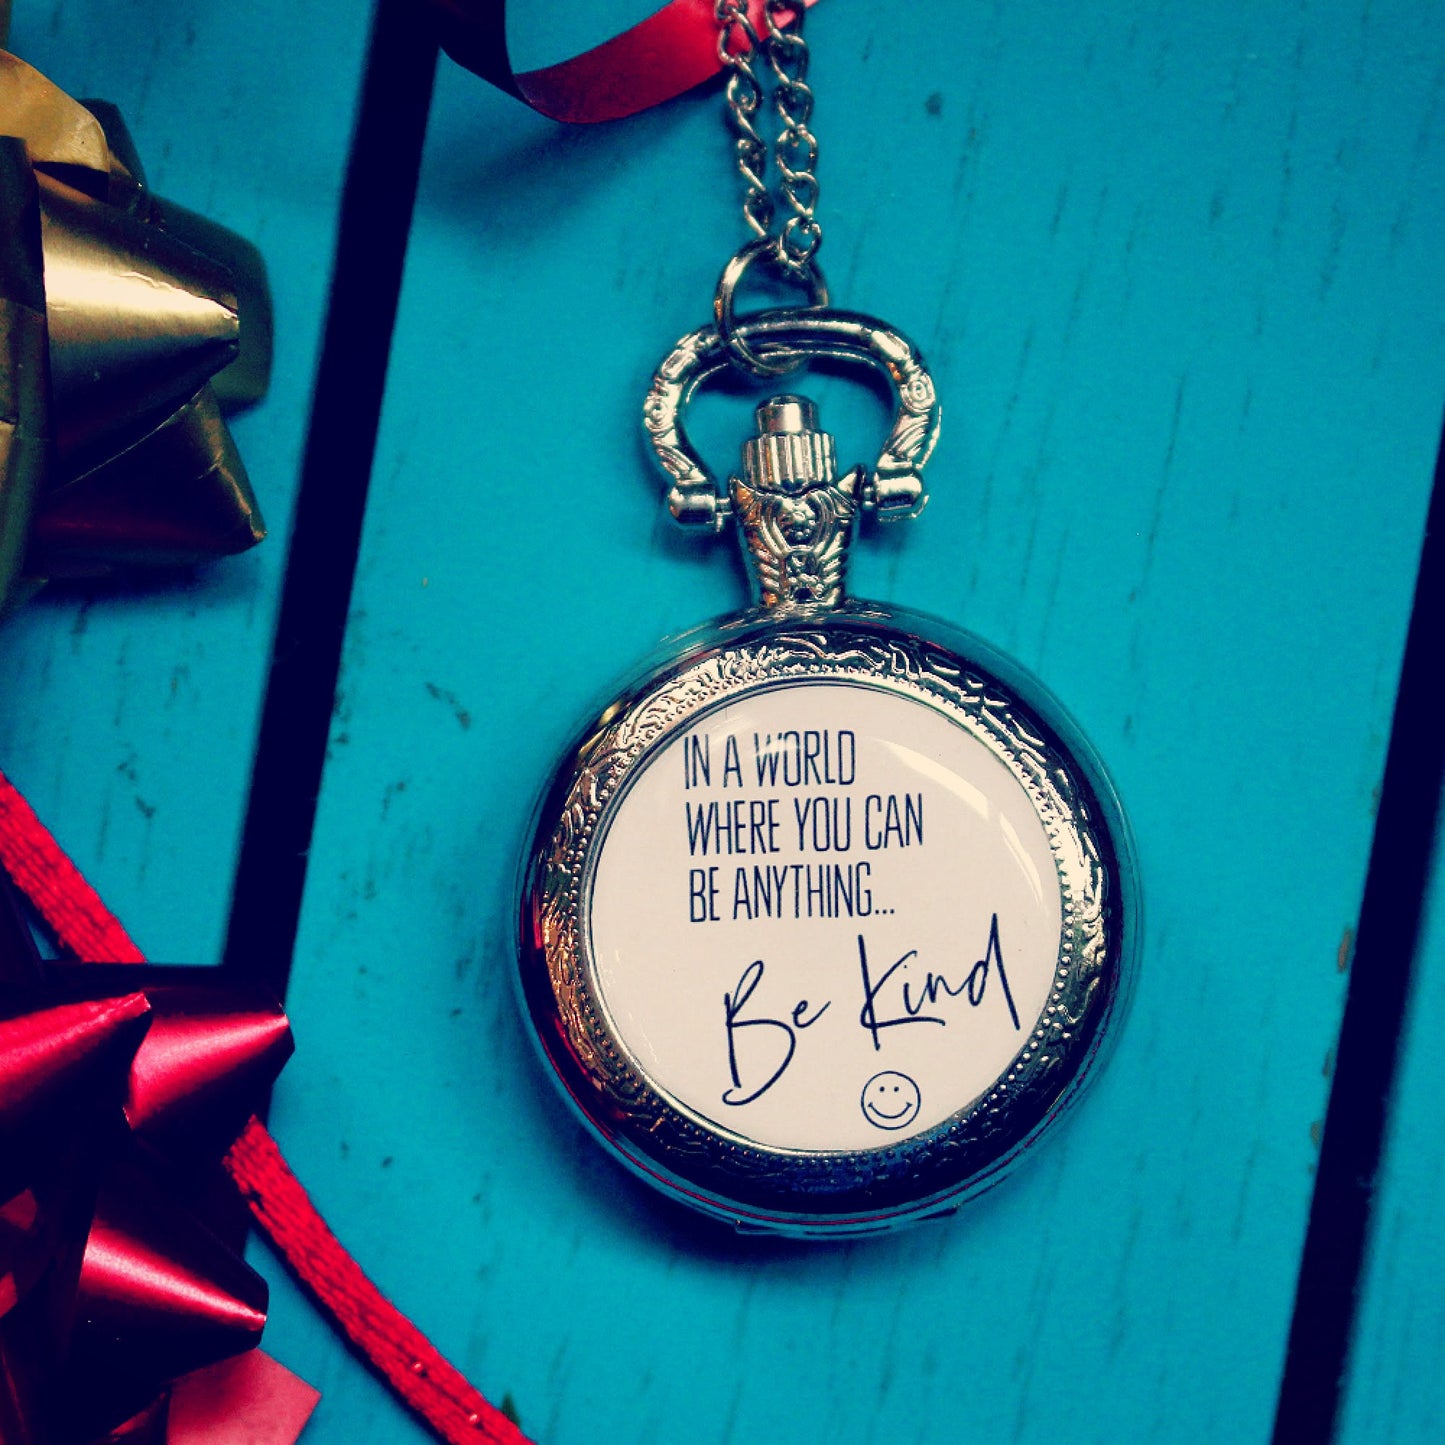 Kindness Pocket Watch. In a world where you can be anything...Be Kind. Mental Health. Mindfulness. Wellness. Be kind and have courage. Quote